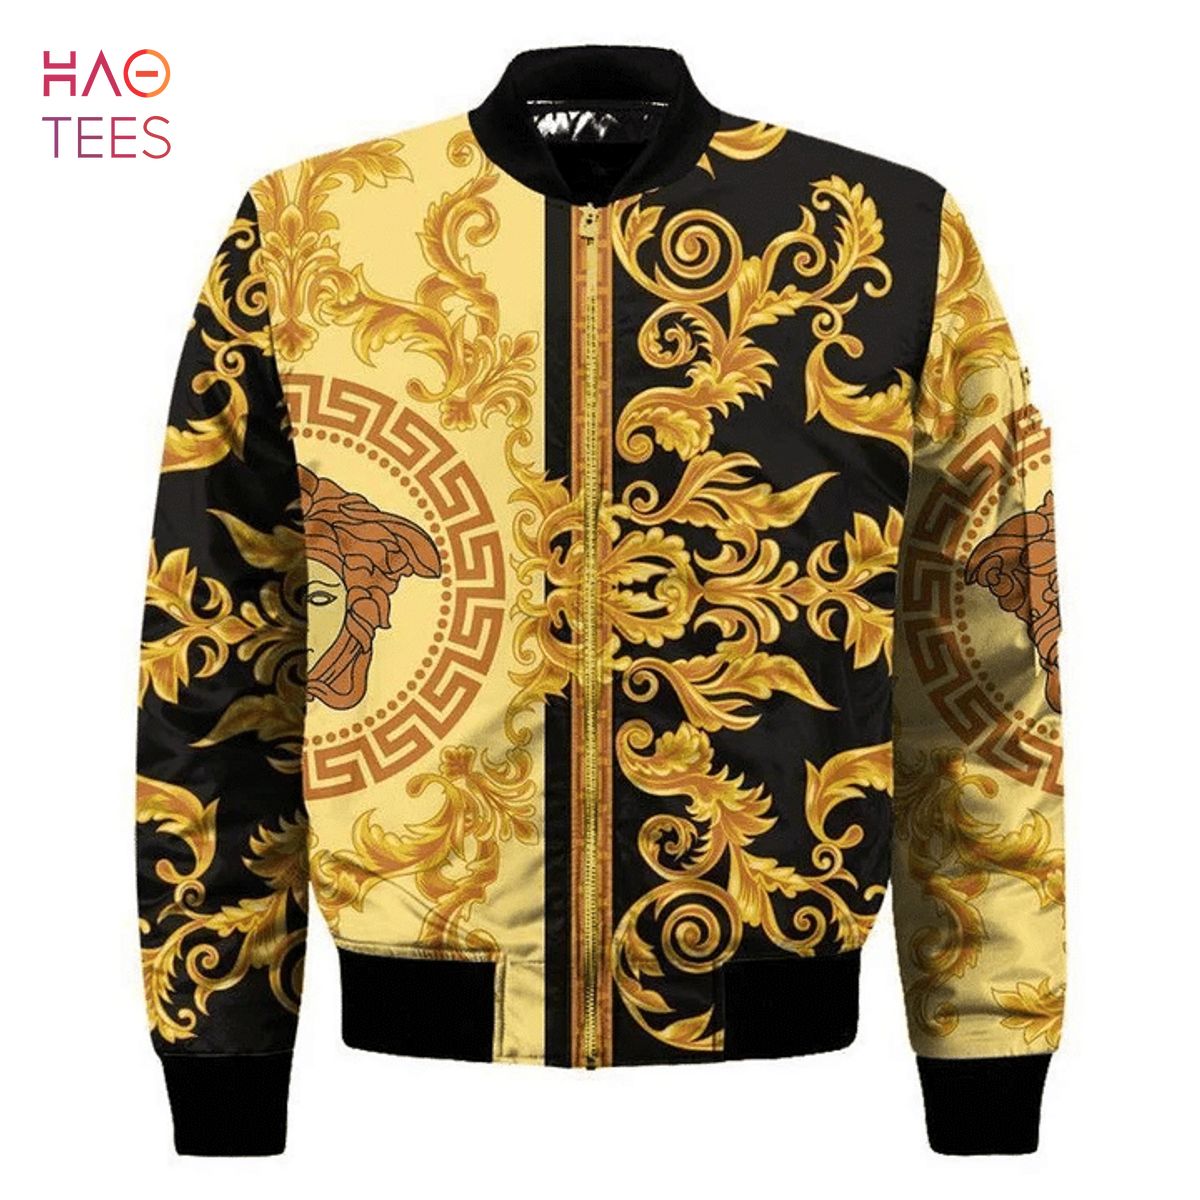 HOT Versace Luxury Brand Full Printing Pattern Bomber Jacket Limited Edition